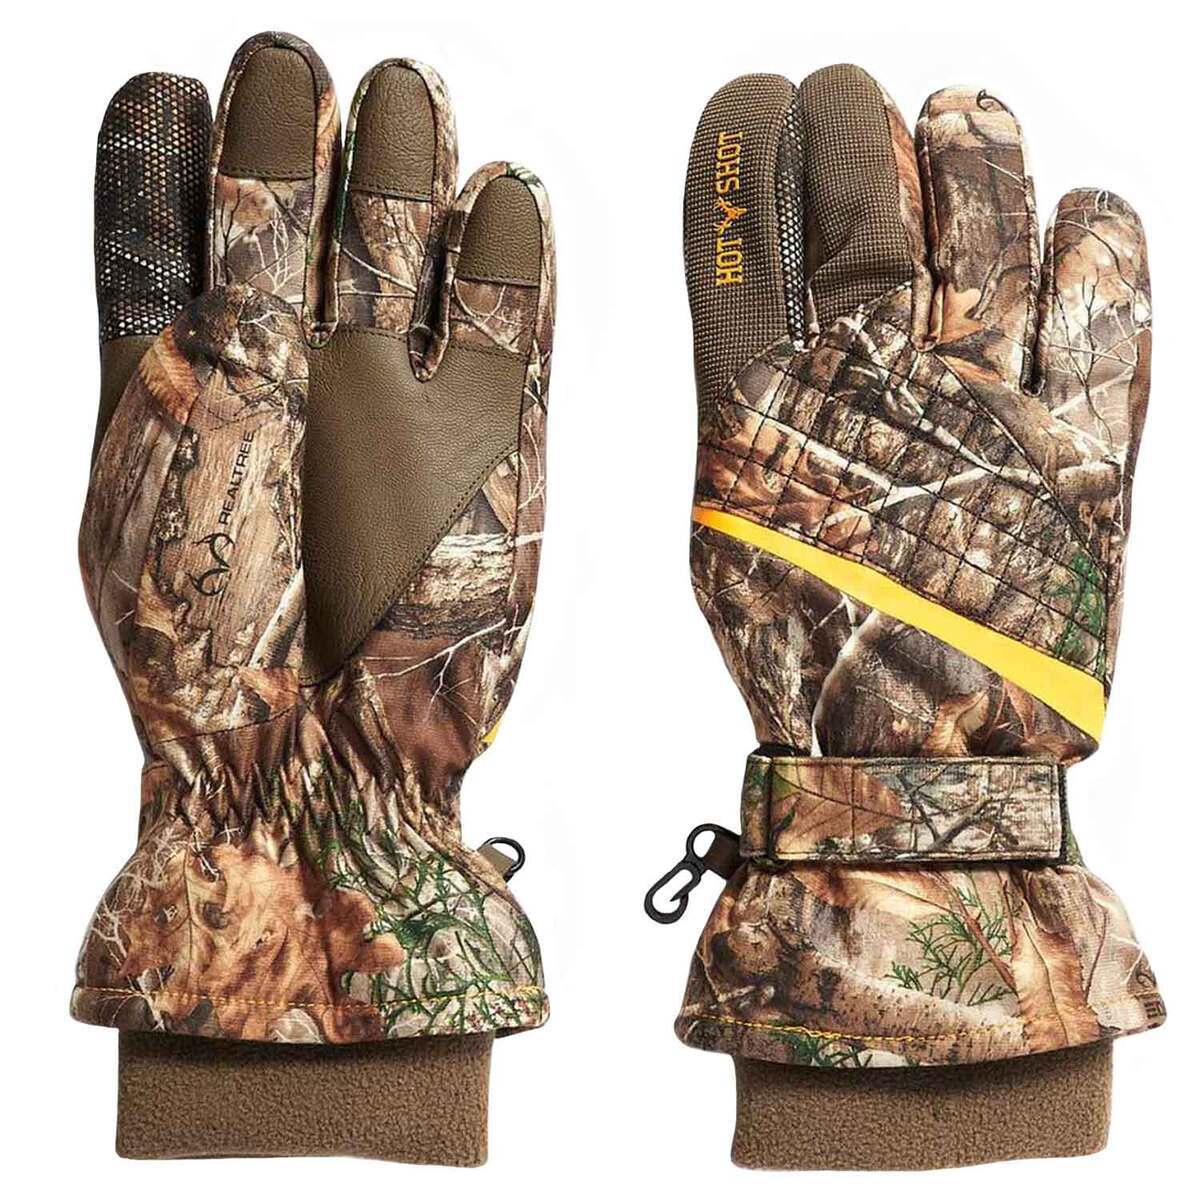 Huntworth Men's Gunner Midweight Hunting Gloves Realtree Timber, Size M/L, Size: Medium/Large